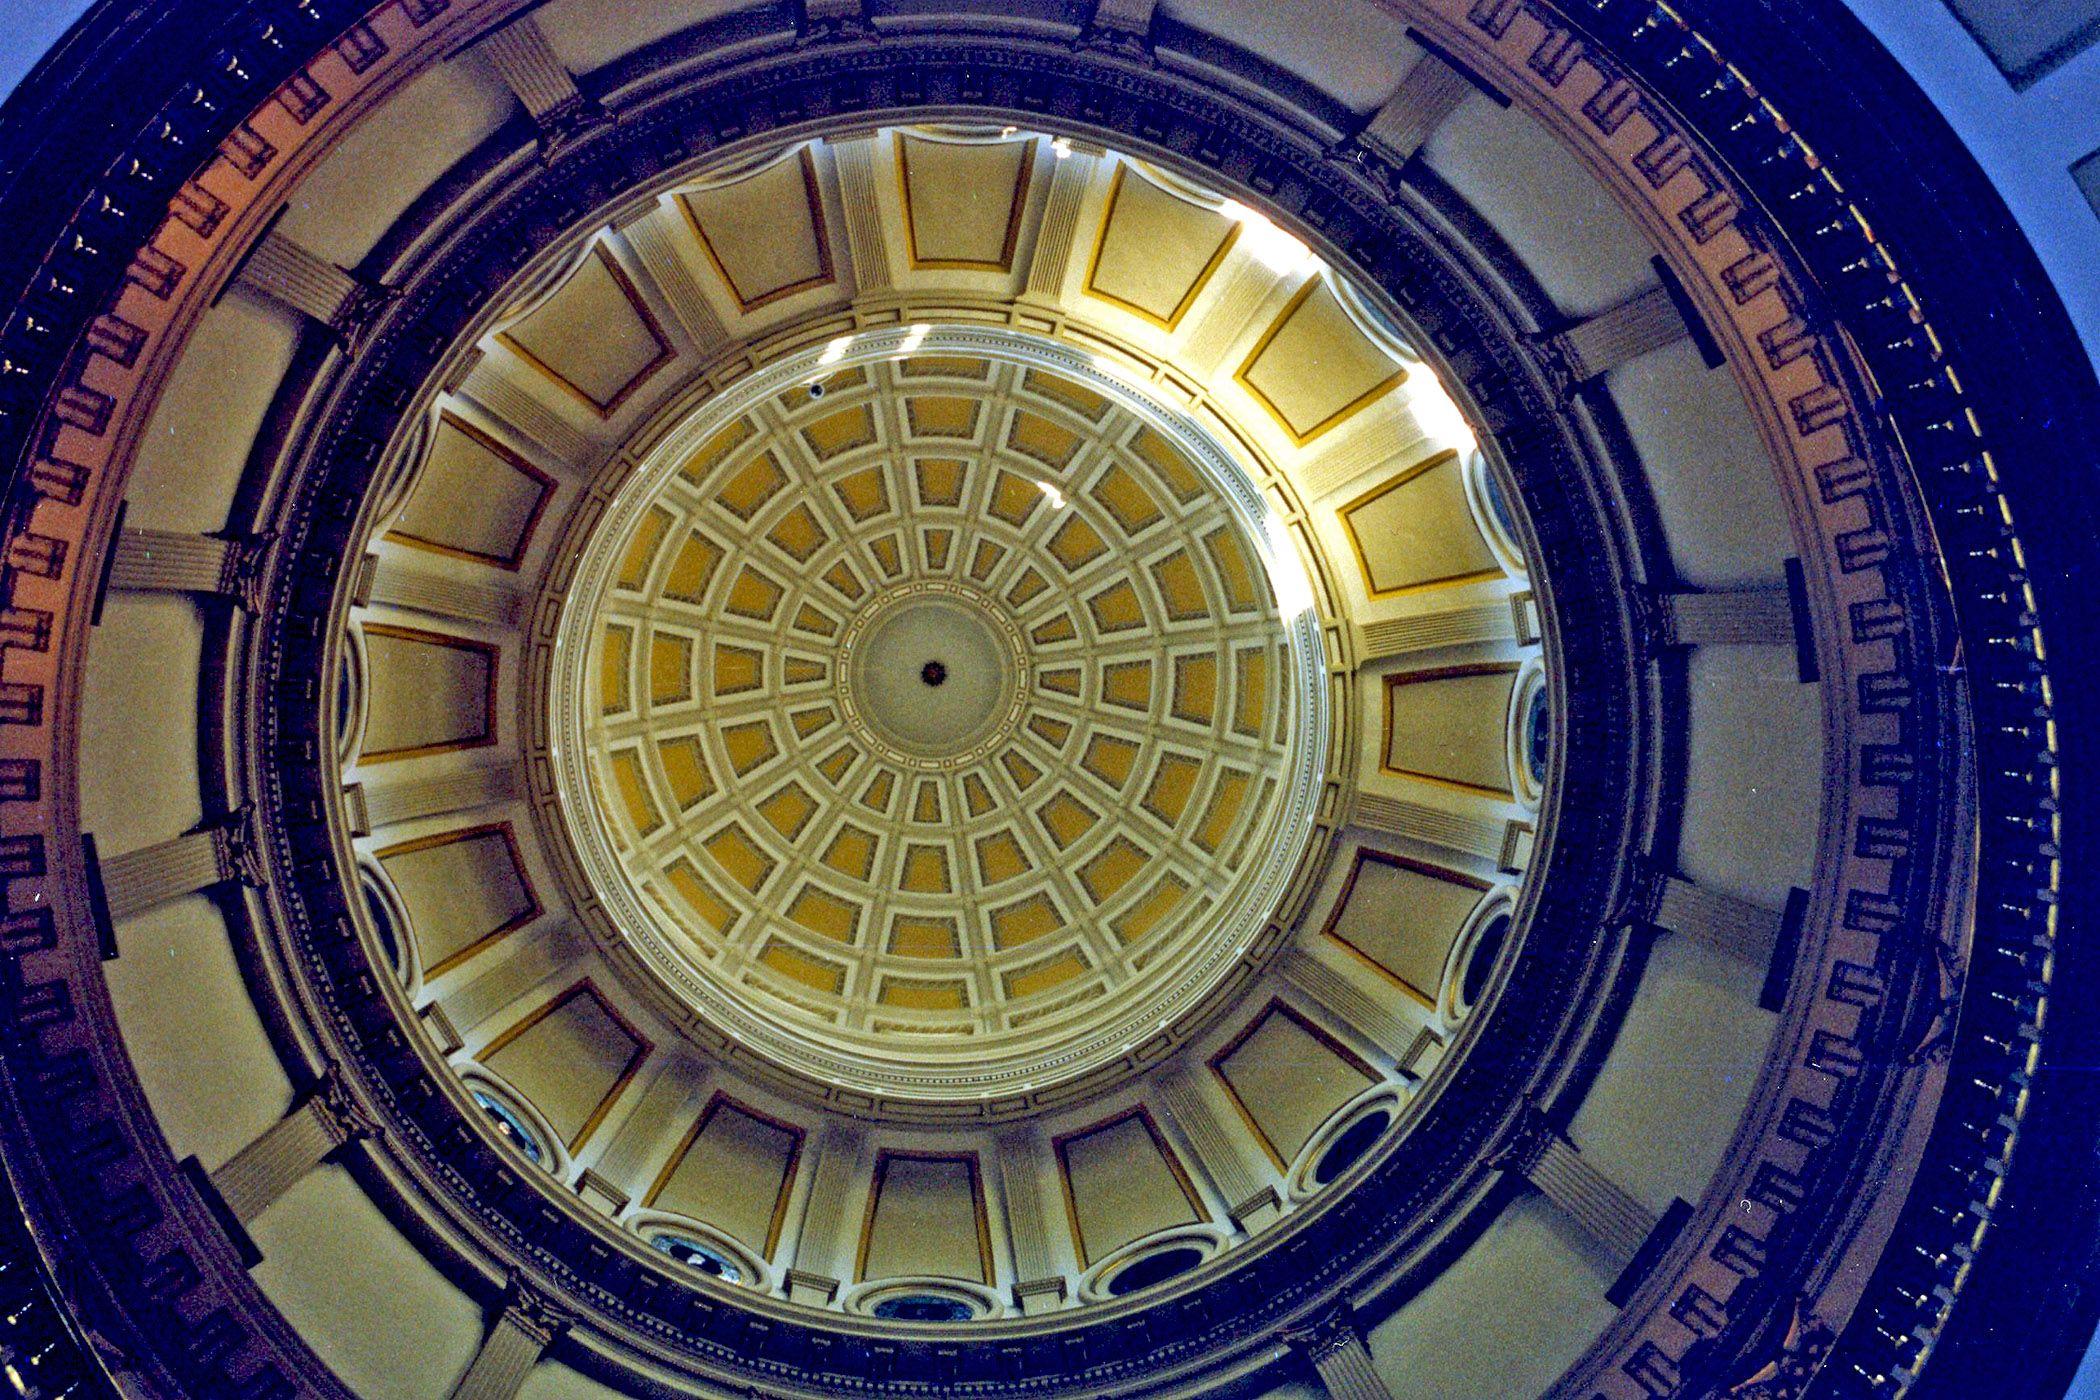 The inside of the Colorado State Capitol's rotunda dome